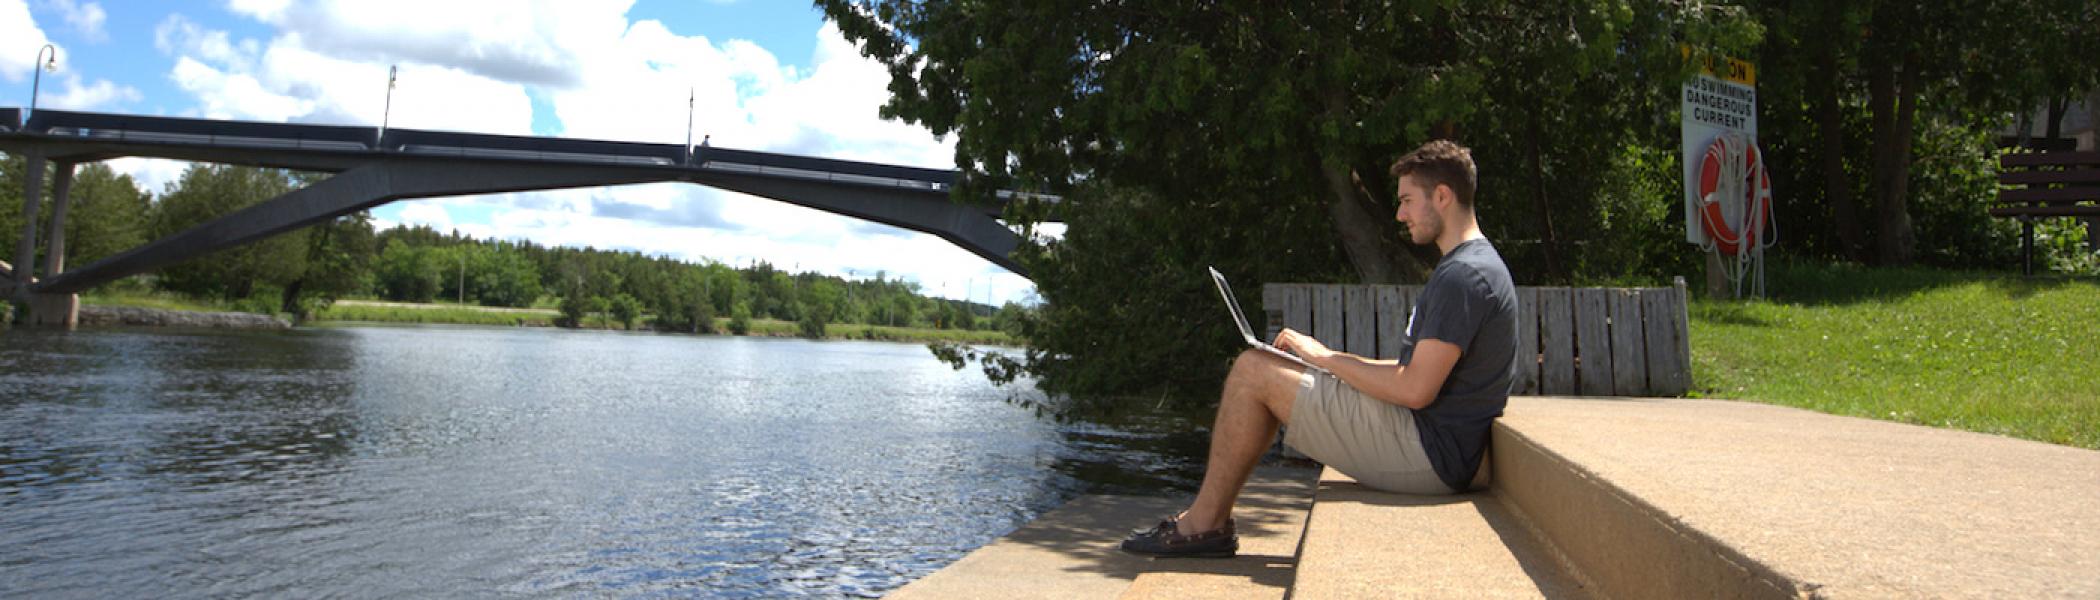 A guy sitting on steps by the river working on his laptop